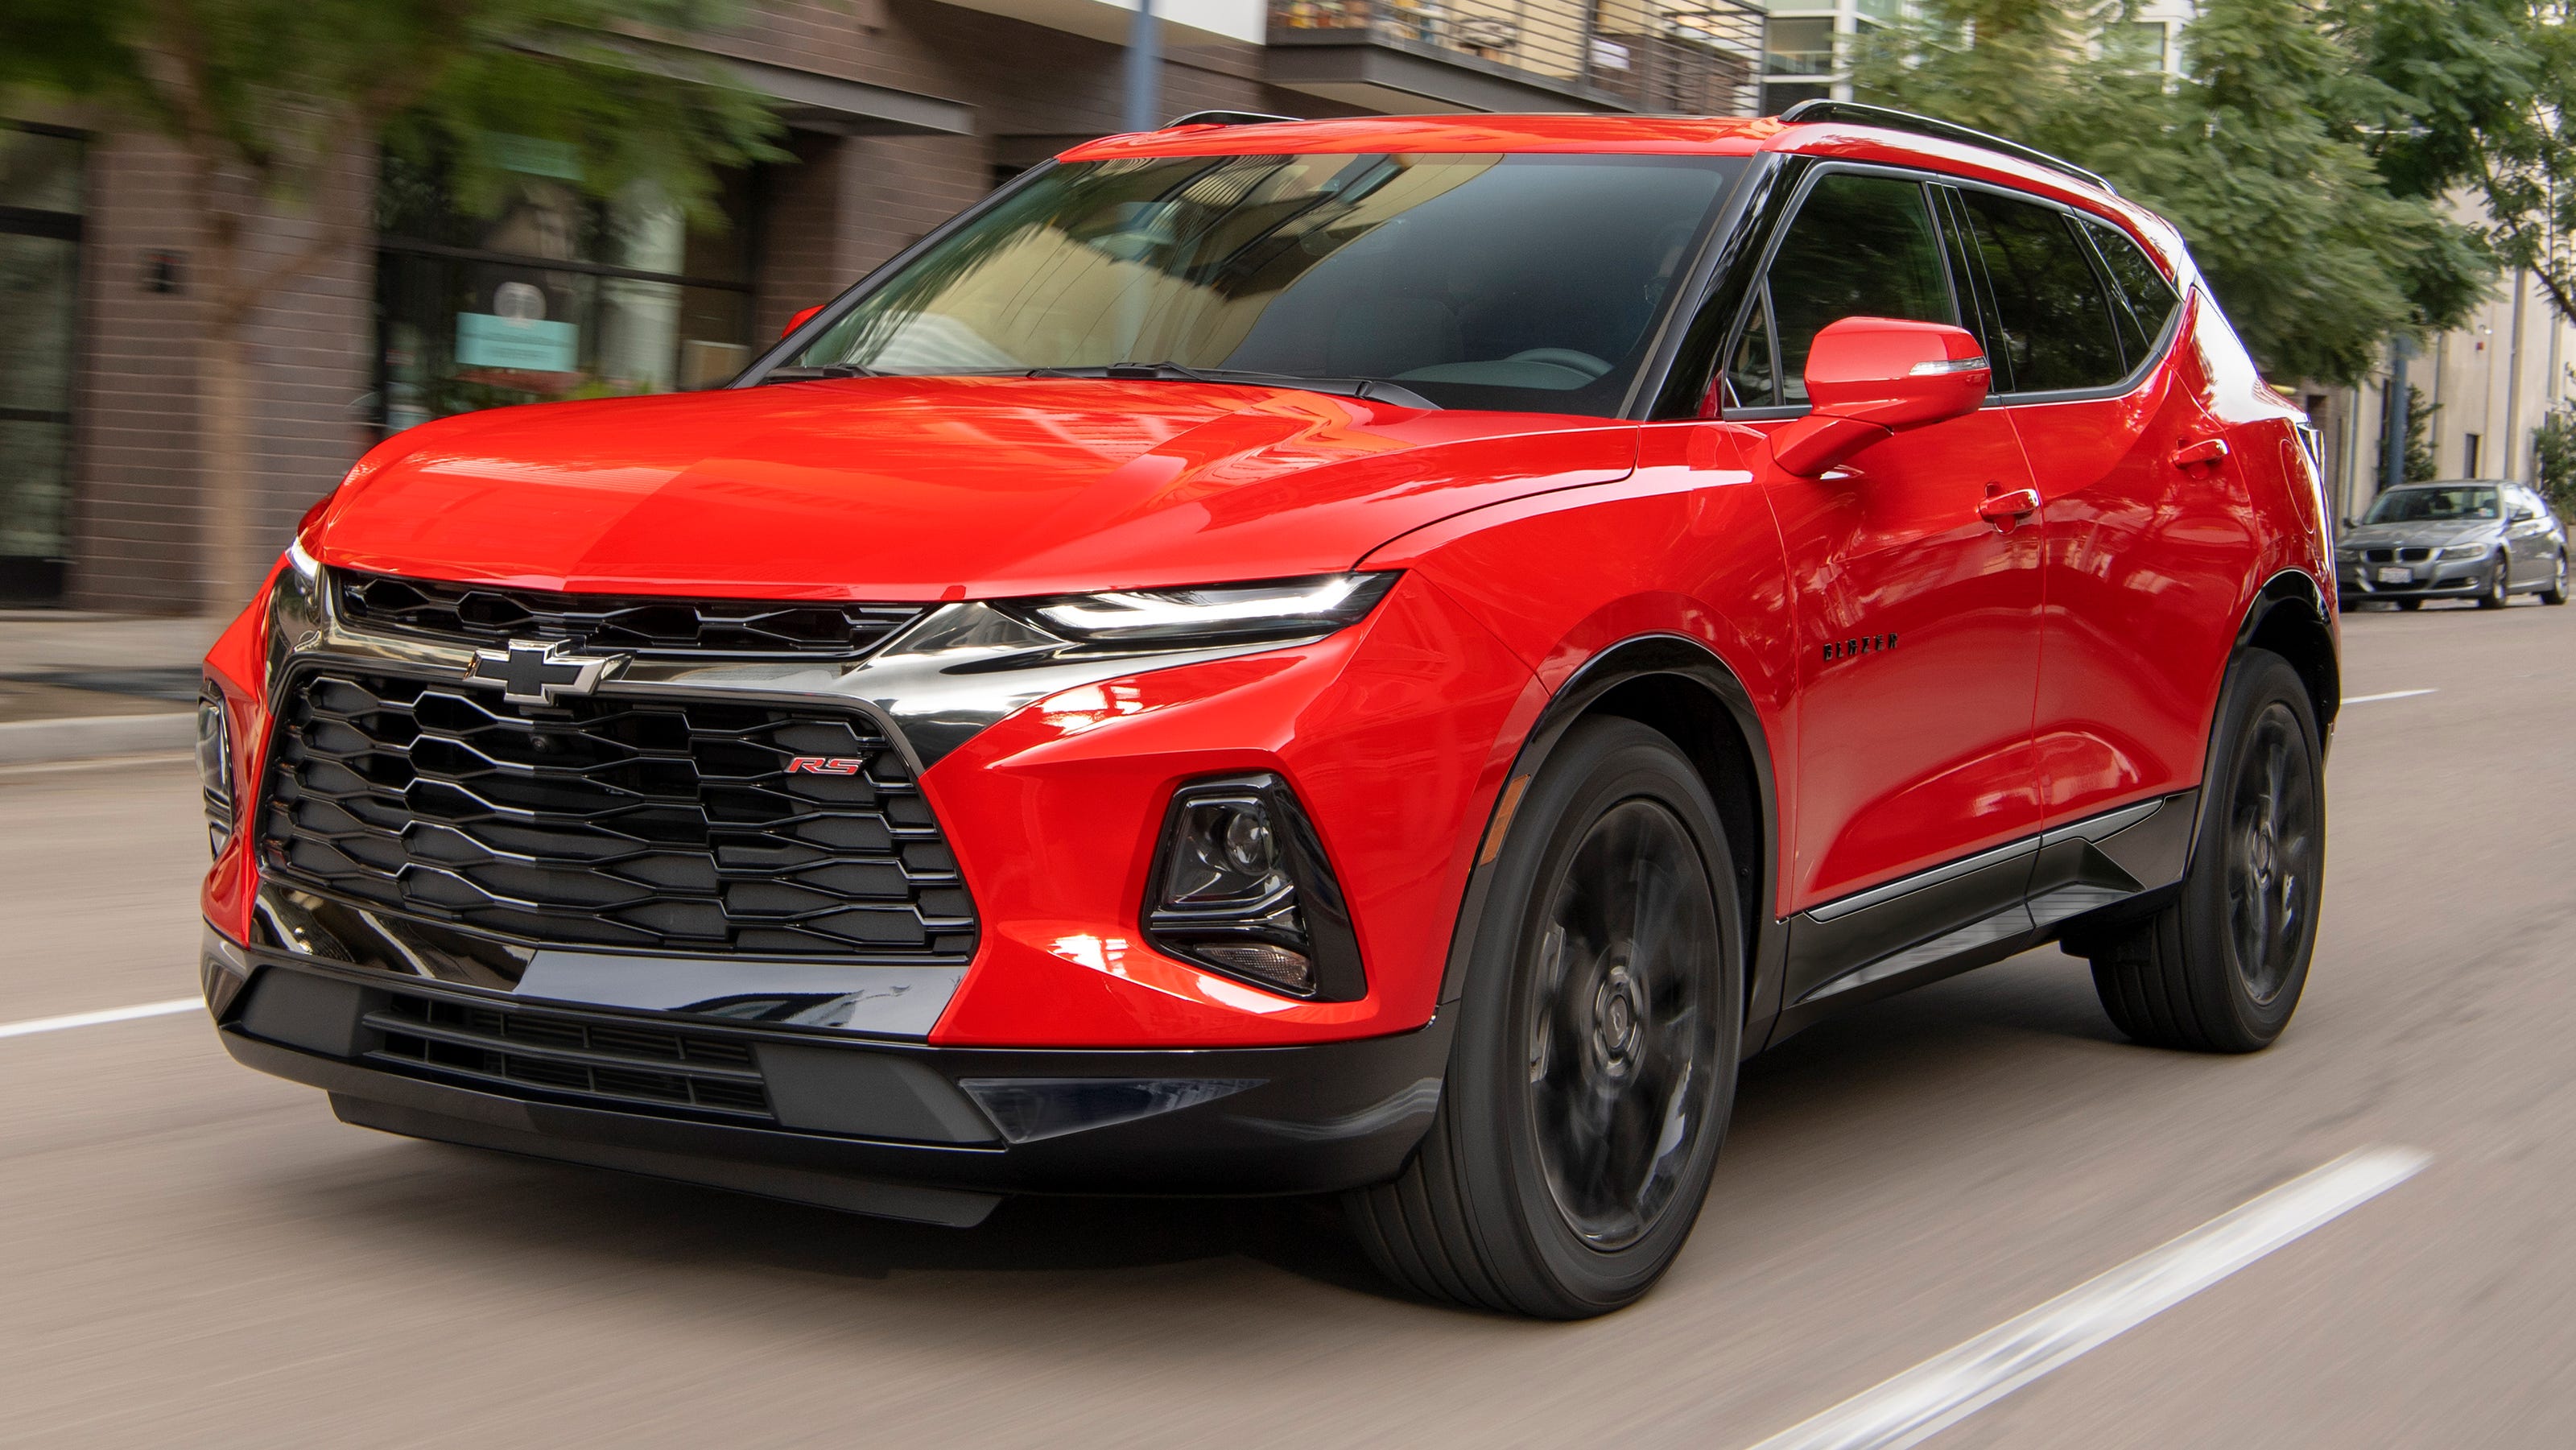 In Ford-Jeep battle for off-road cred, Chevy Blazer sits it out